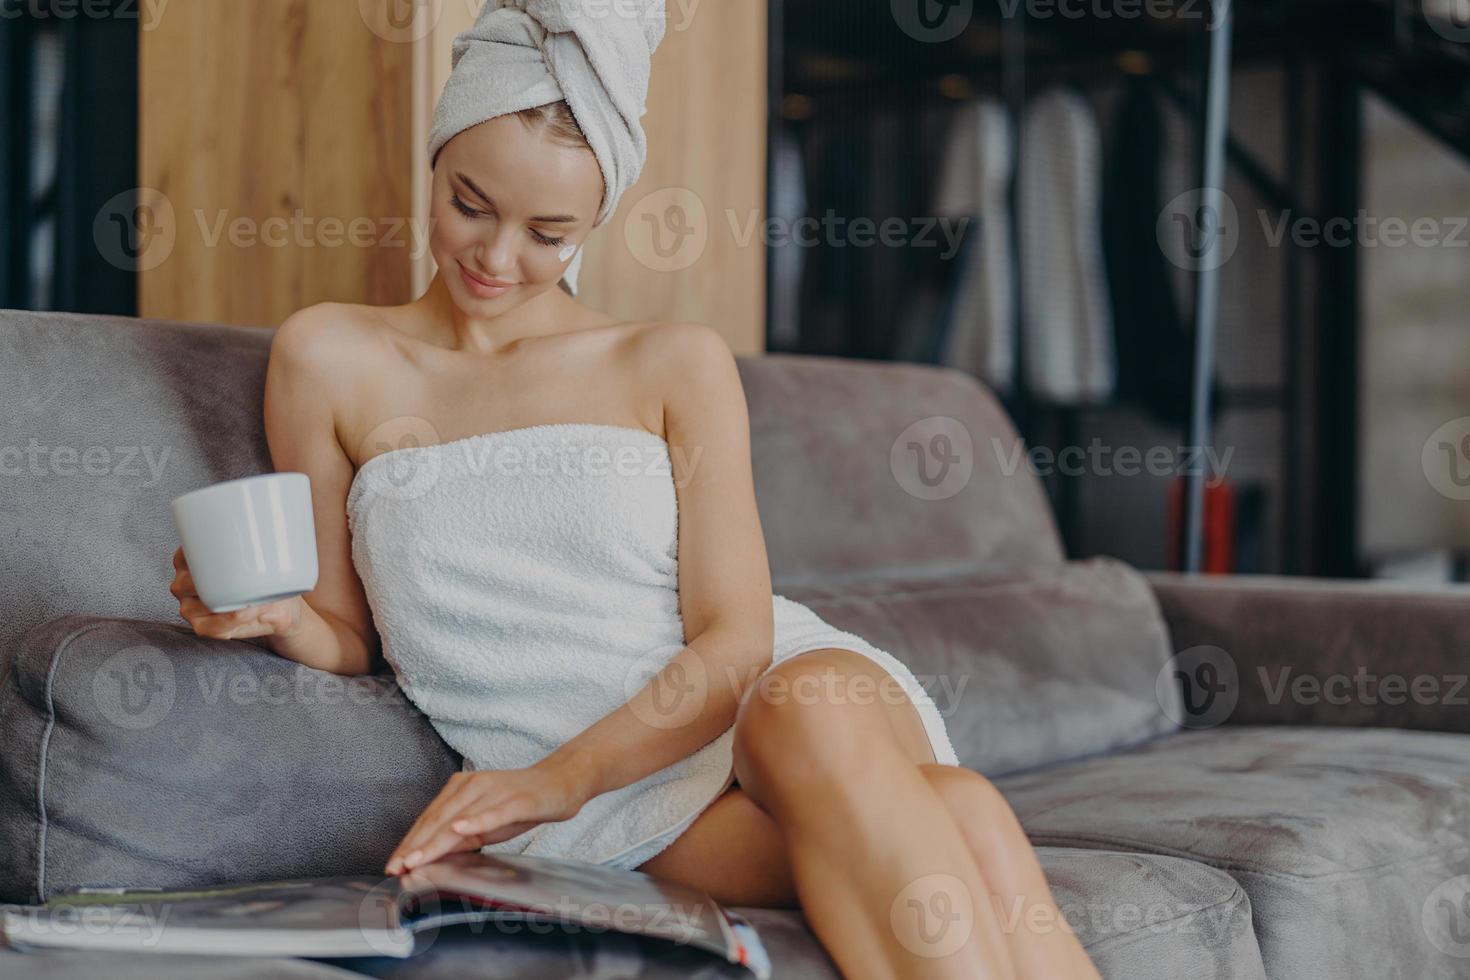 Indoor shot of relaxed beautiful woman sits relaxed on sofa, wears bath towel around body after taking shower, holds cup of tea, reads magazine, spends free time at home. Wellness, hygiene concept photo